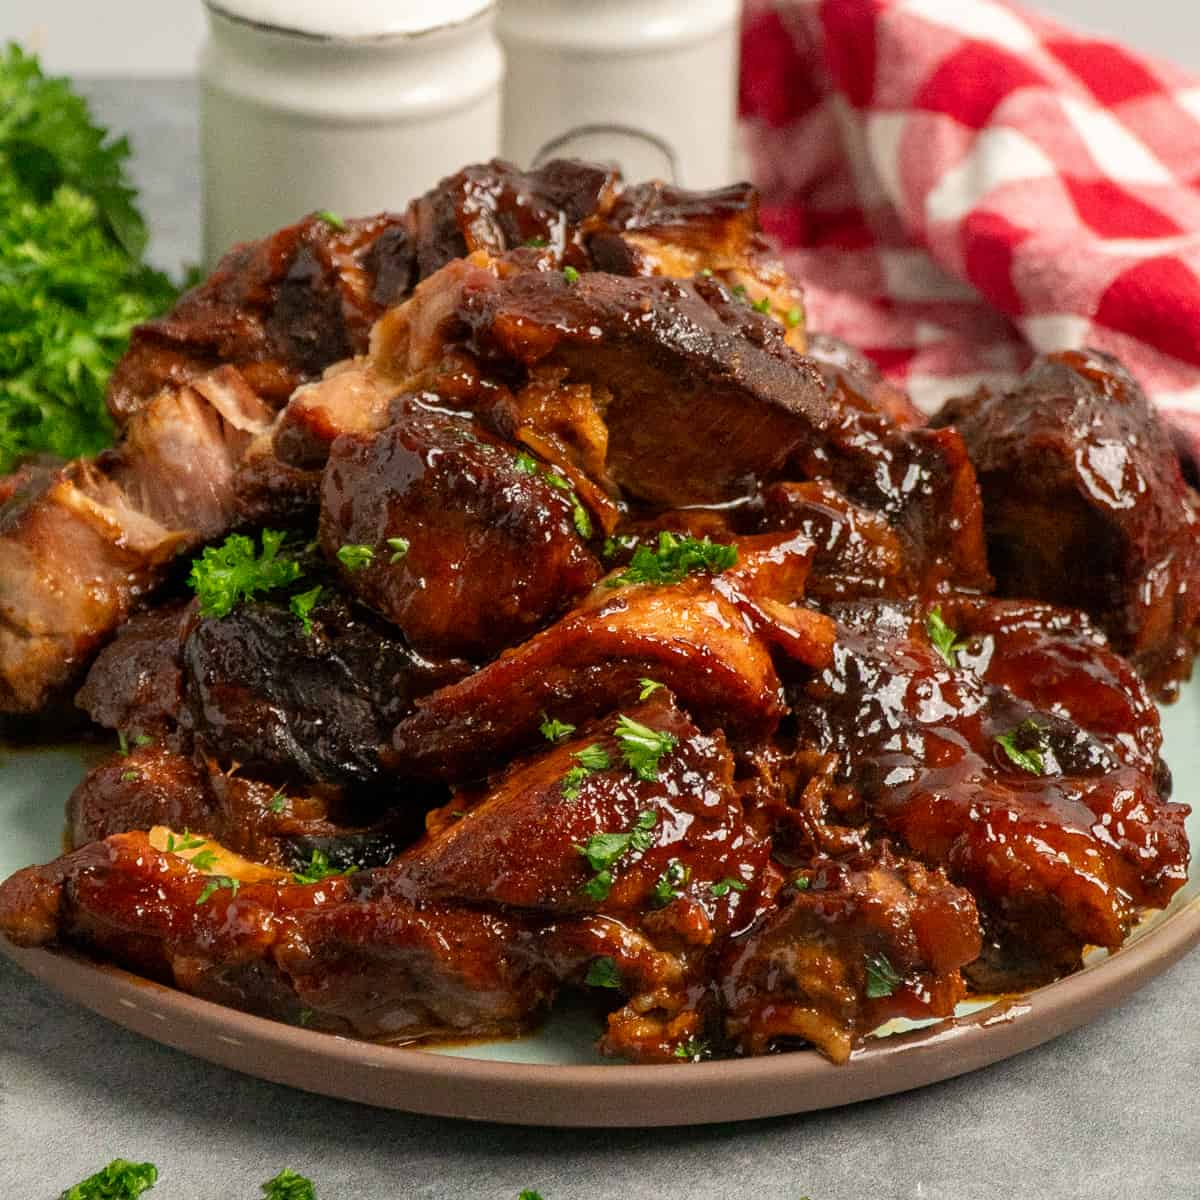 Country style ribs on a plate.